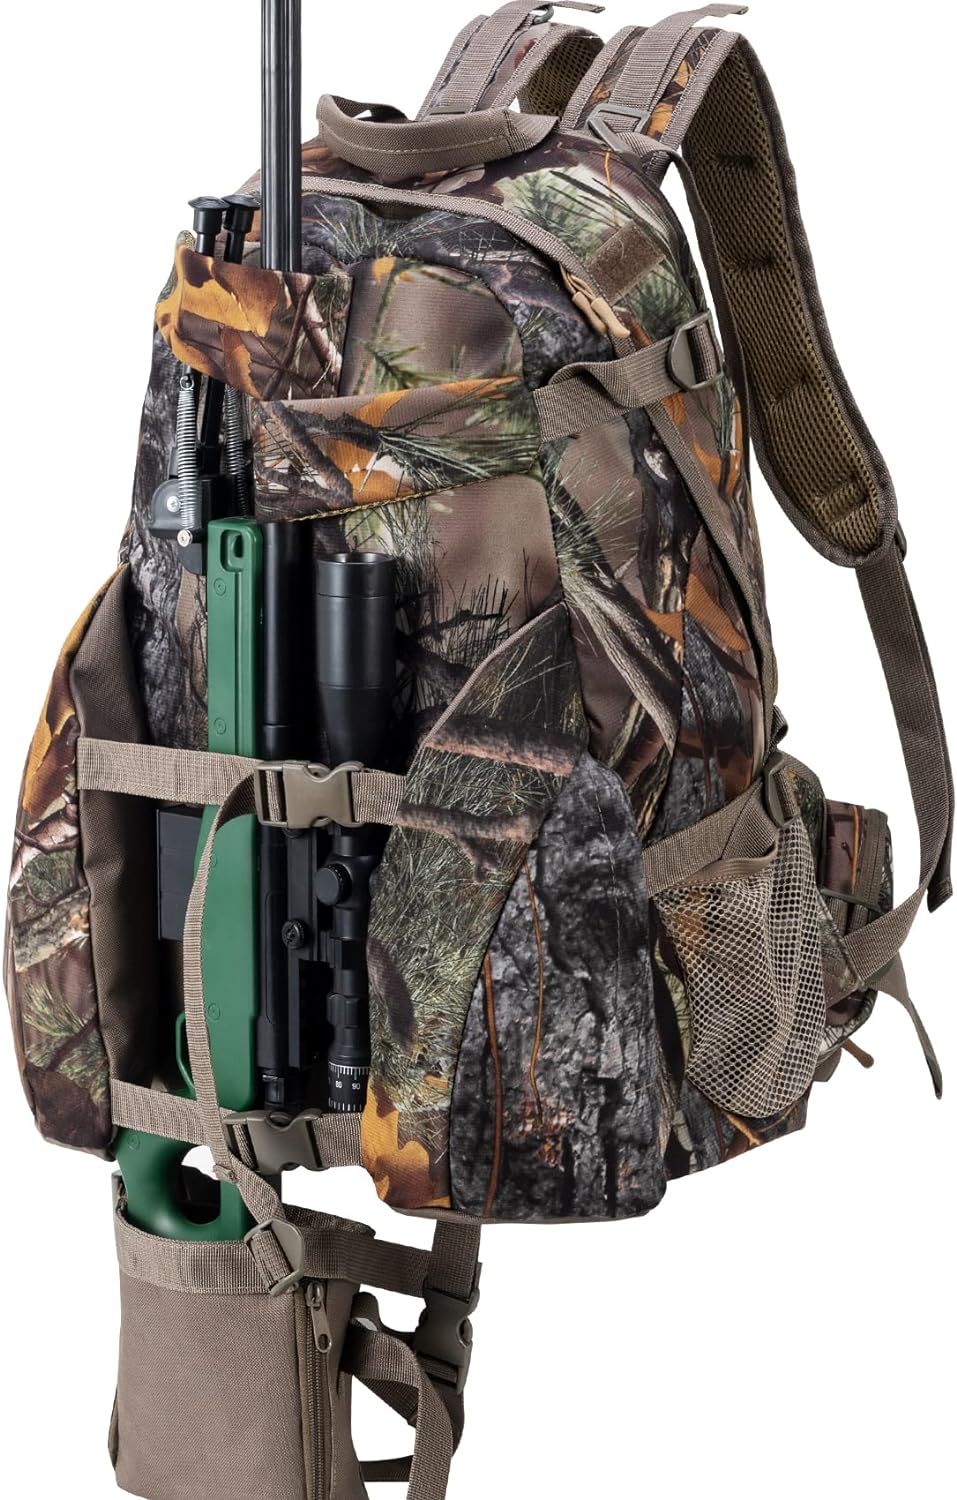 BLISSWILL Hunting Backpack Outdoor Gear Hunting Daypack for Rifle Bow Gun | Amazon (US)